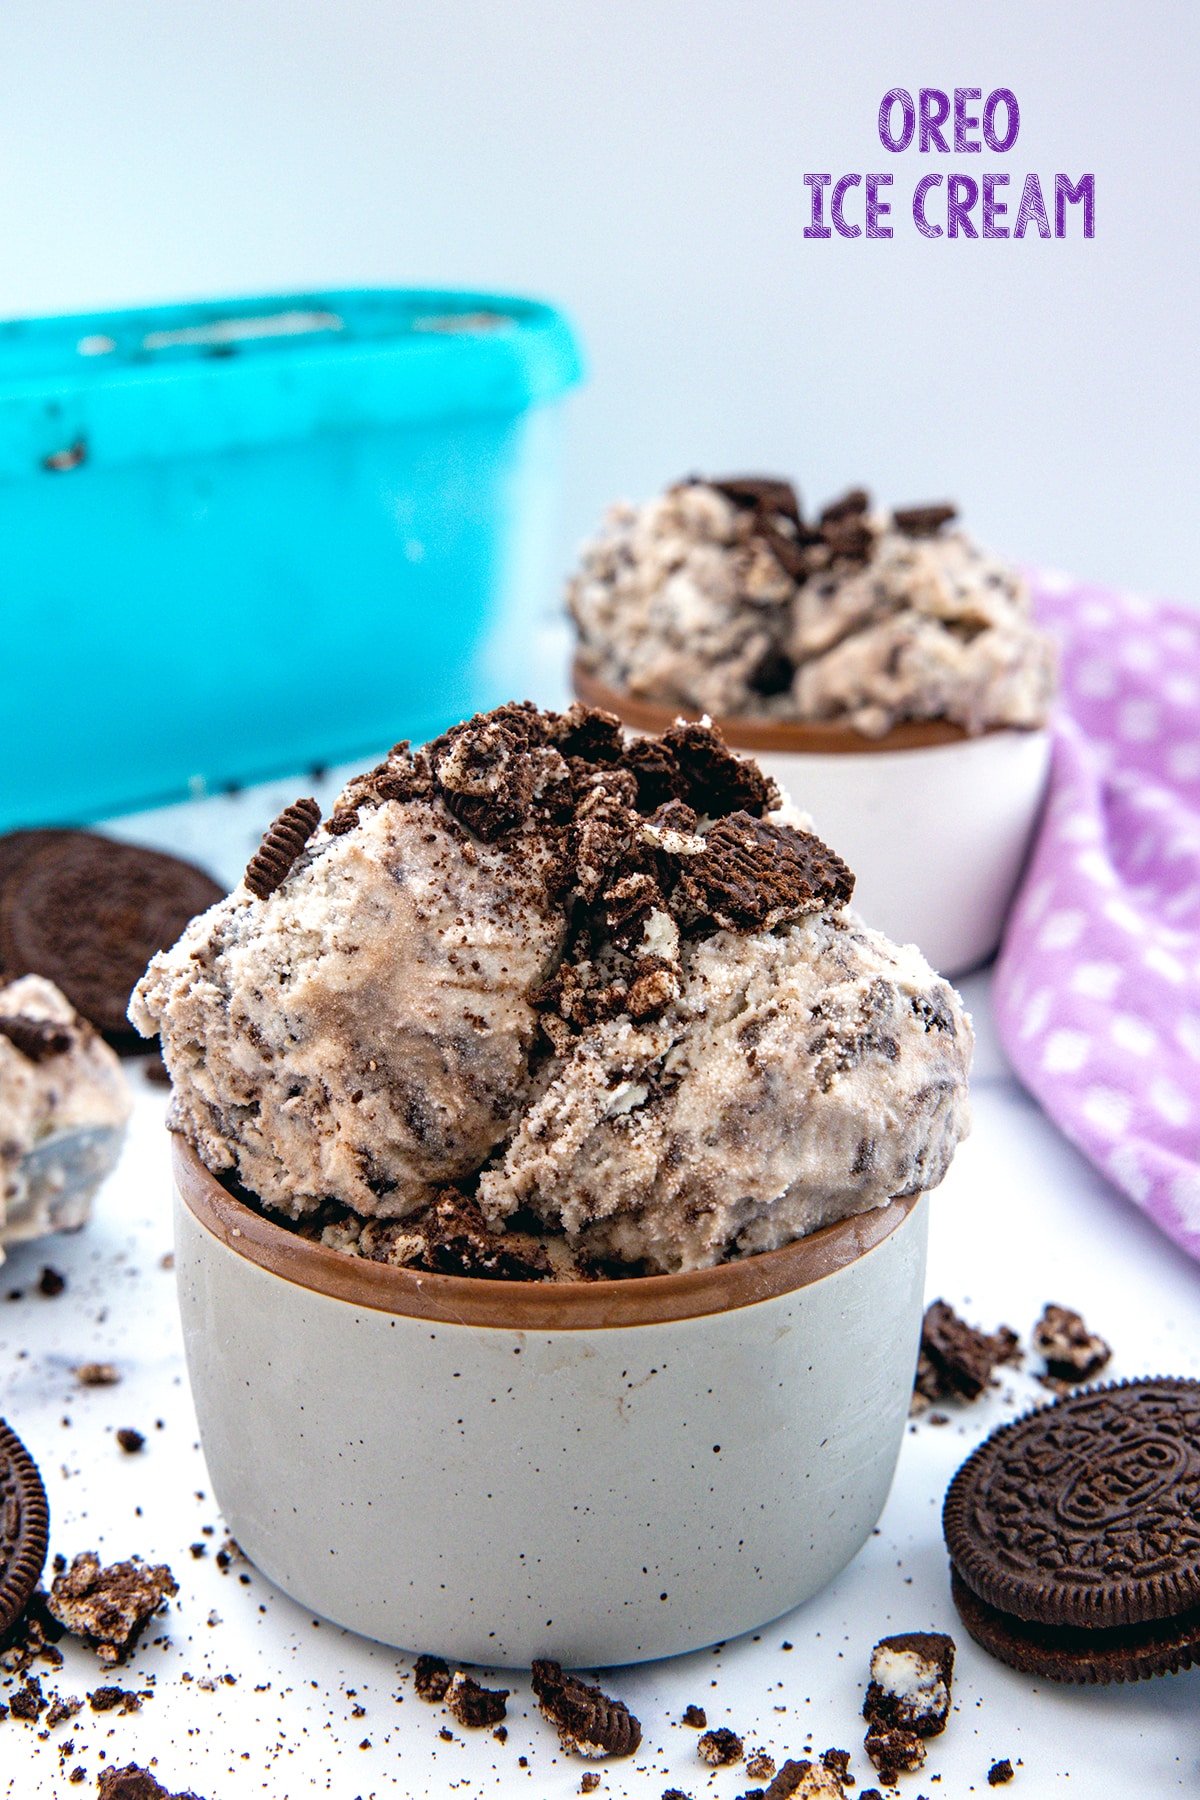 Head-on view of a bowl of Oreo ice cream with second bowl and container in background, Oreo cookies all around and recipe title at top.